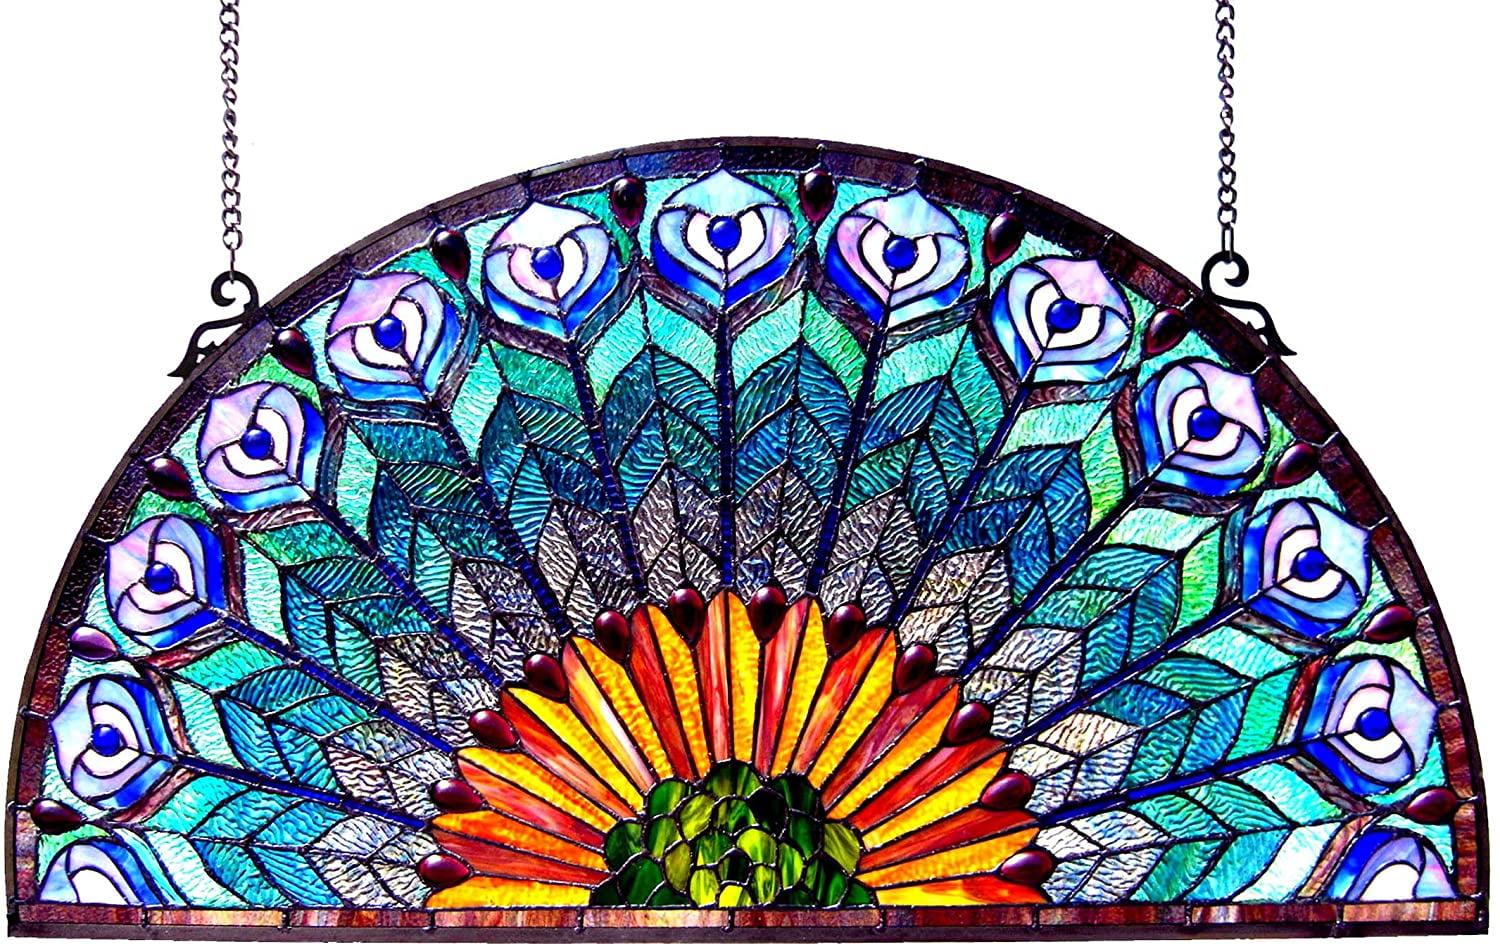 Eudora Antique Bronze Peacock Feather Stained Glass Window Panel 35x18